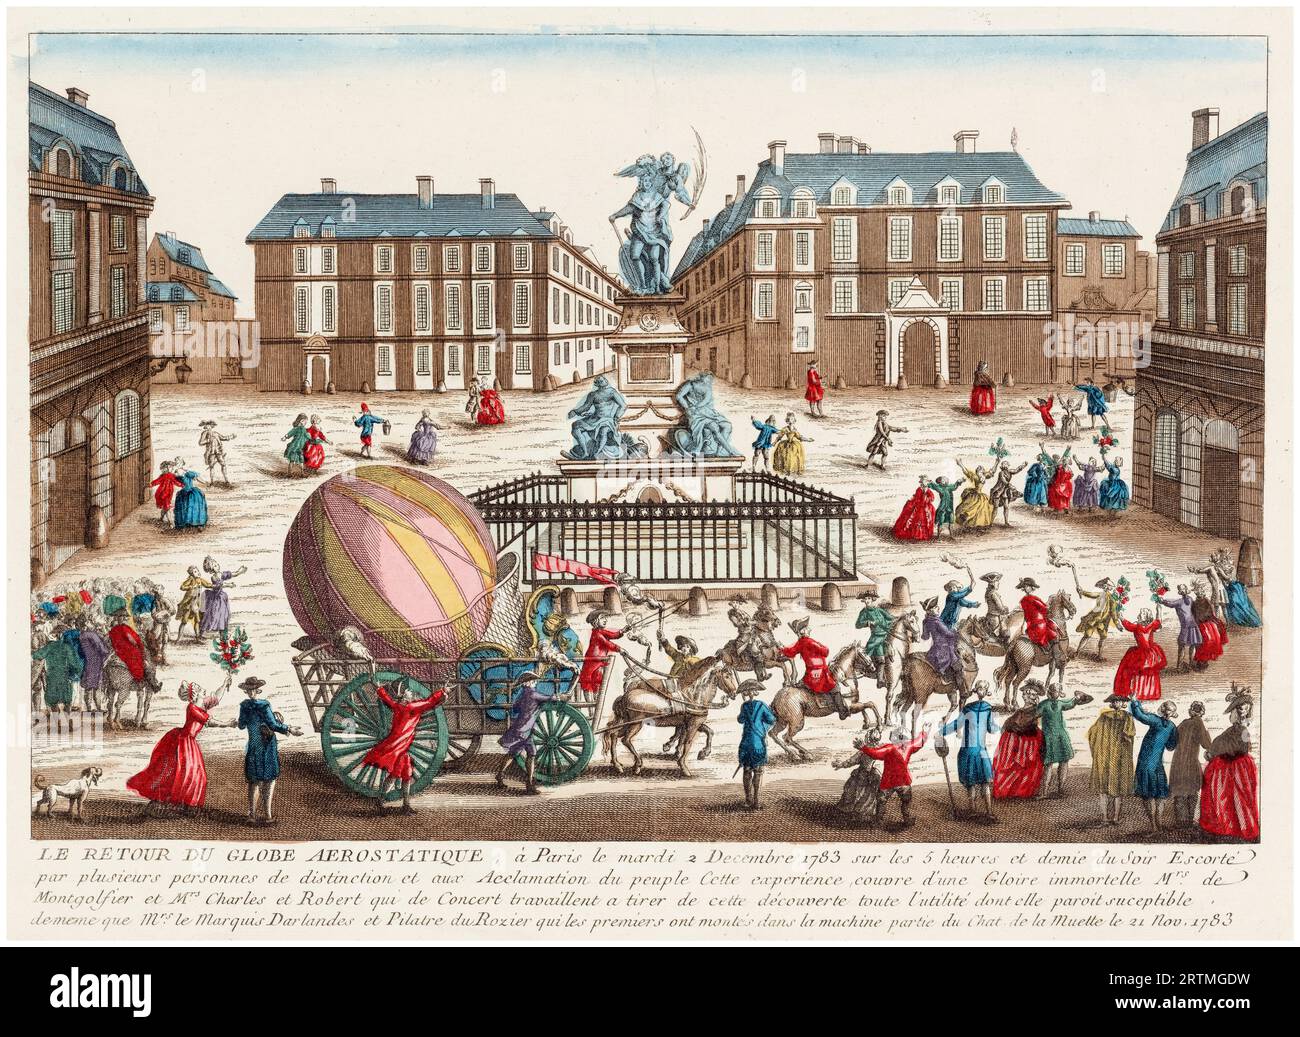 The return of the Aerostatic Globe hydrogen balloon to Paris on Tuesday December 2nd 1783 after its successful flight by Jacques Charles and Marie-Noël Robert the day before. Hand coloured engraving, 1783 Stock Photo